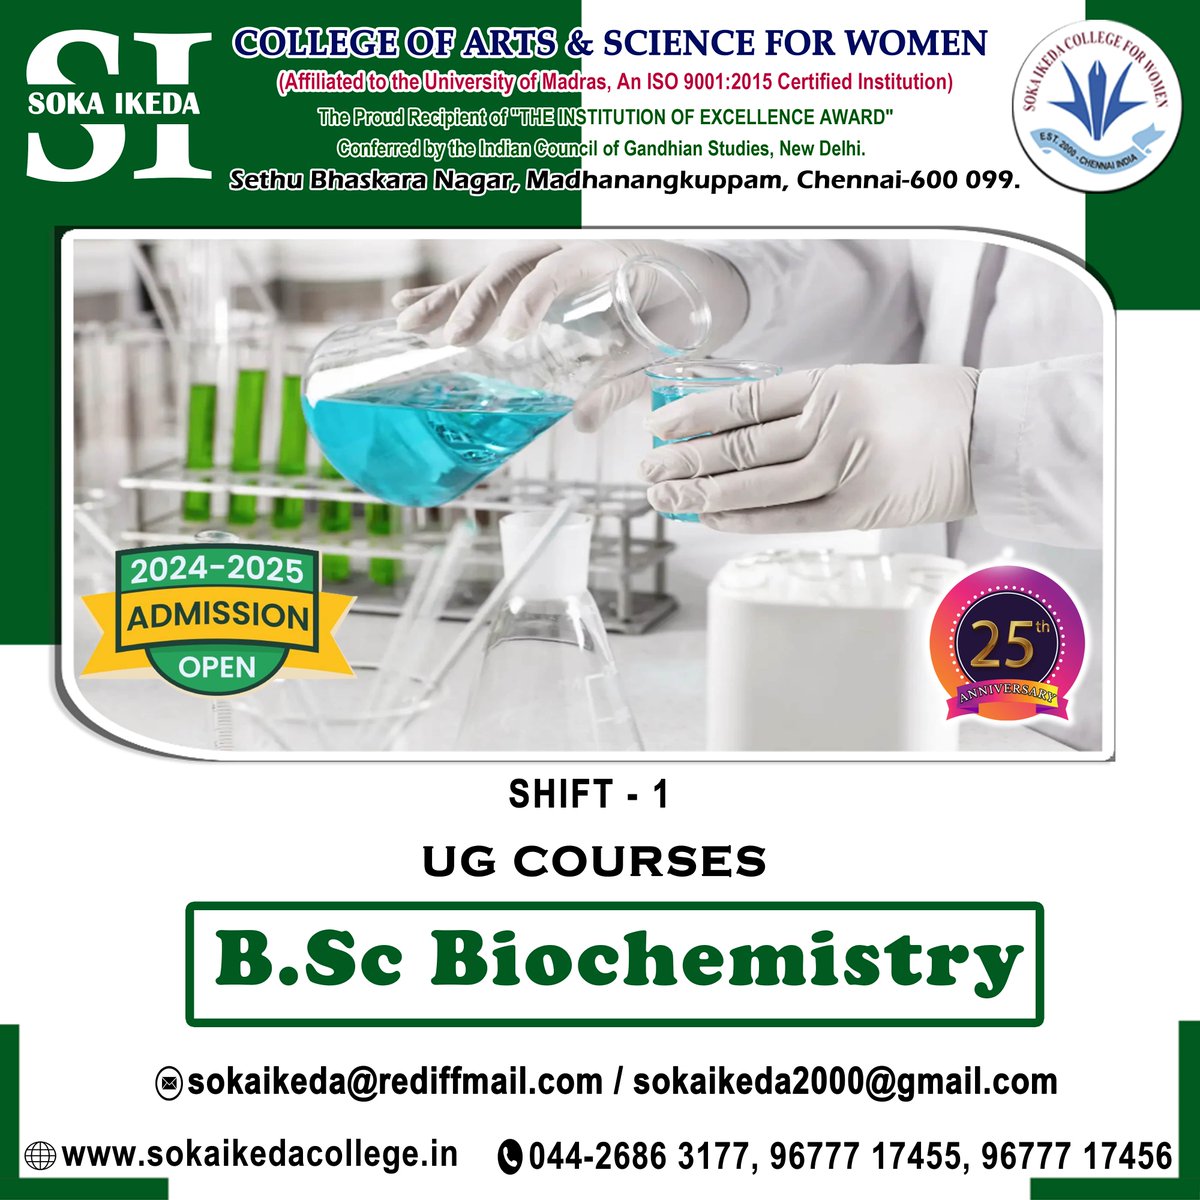 𝐁.𝐒𝐜 -𝐁𝐢𝐨𝐜𝐡𝐞𝐦𝐢𝐬𝐭𝐫𝐲

𝐒𝐜𝐨𝐩𝐞 𝐨𝐟 𝐁𝐢𝐨𝐜𝐡𝐞𝐦𝐢𝐬𝐭𝐫𝐲 :
Biochemistry offers a wide range of scientific insights, bringing together various aspects of life and living organisms.

#ScopeofCommerce #BSc #Biochemistry #SokaIkedaCollege #coursesoffer #SI